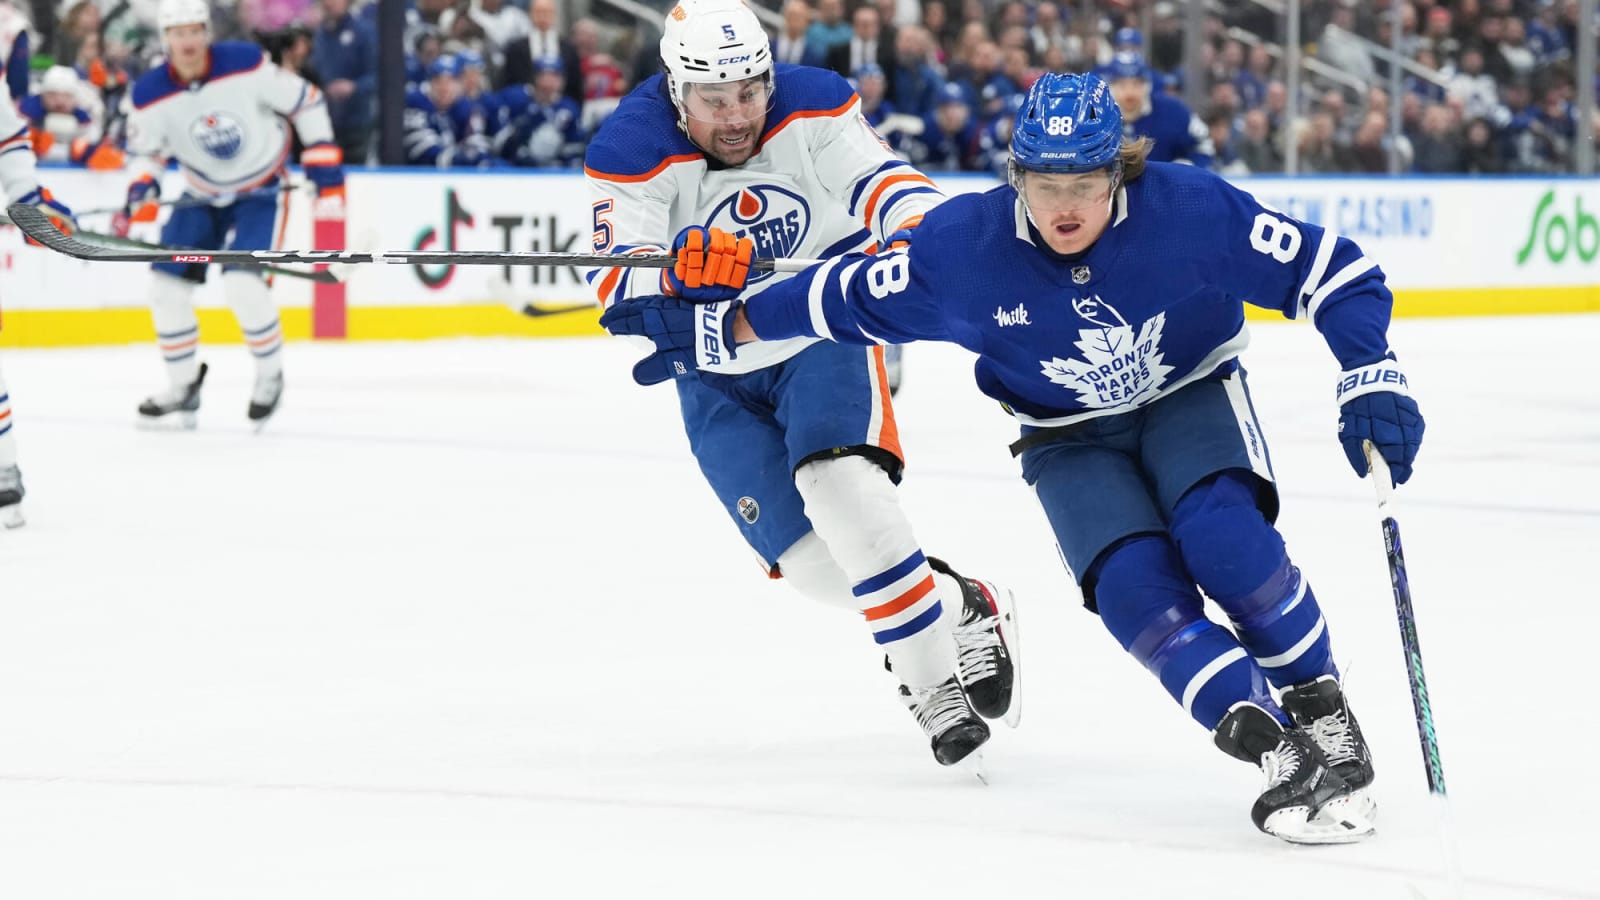  Golden Knights claim Tobias Bjornfot off waivers from Kings as William Nylander and Maple Leafs near contract extension